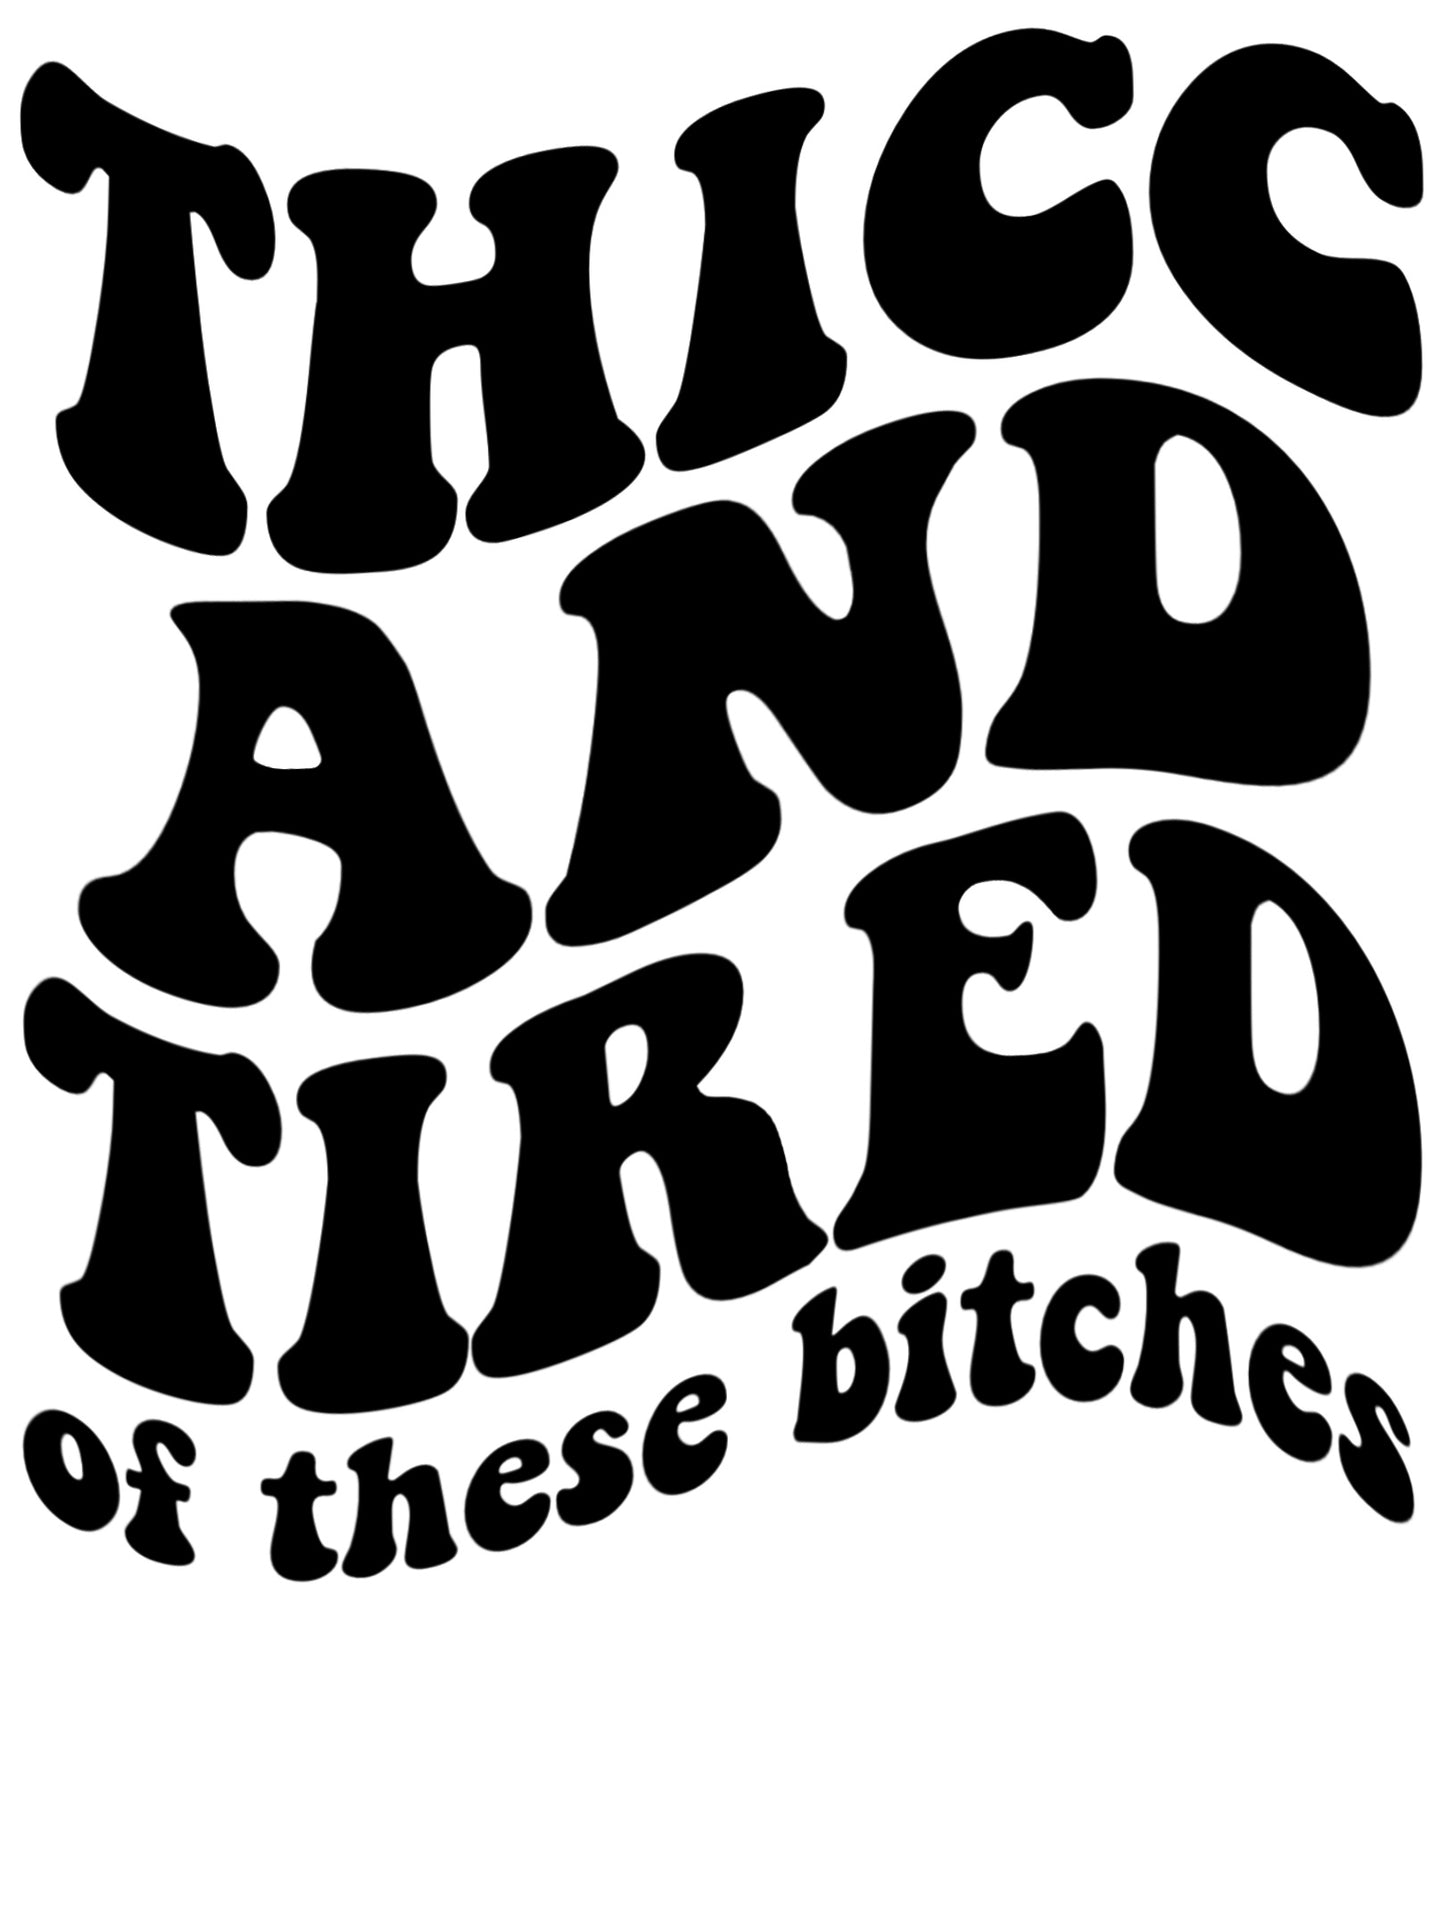 "Thicc and Tired: Bold Attitude Tee"